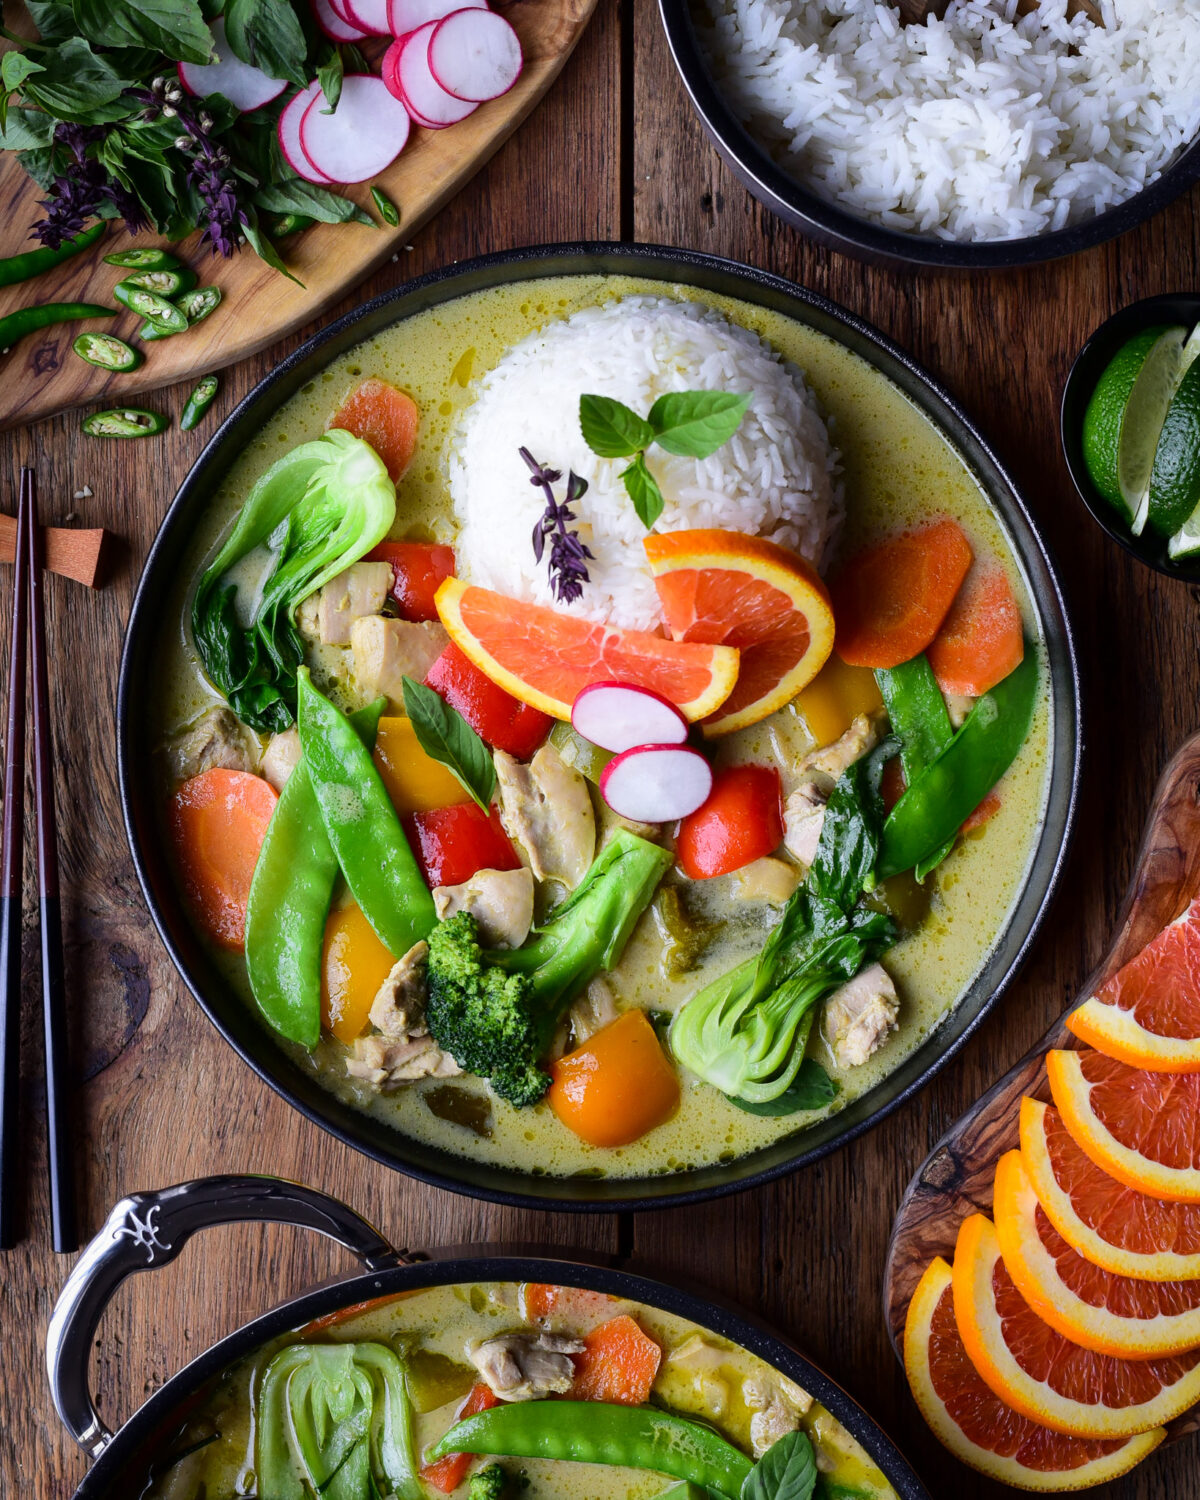 A colourful and vibrant plate of Thai Green Curry Chicken & Vegetables. Served with jasmine rice, Thai basil, orange slices and green chilies.